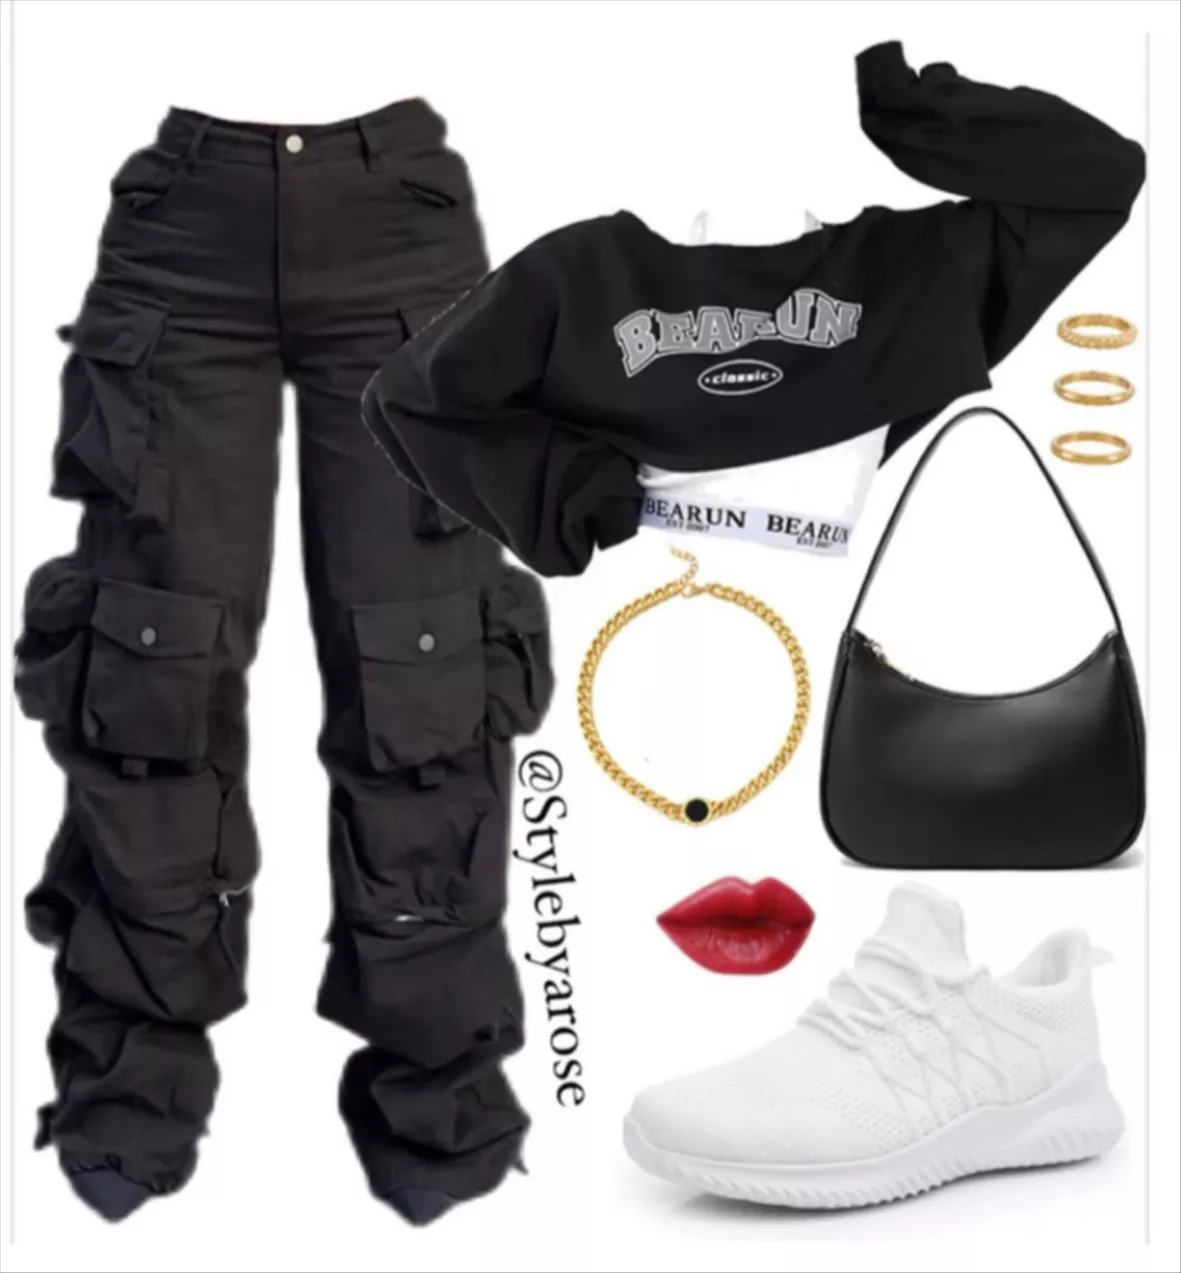 pretty girls with swag polyvore